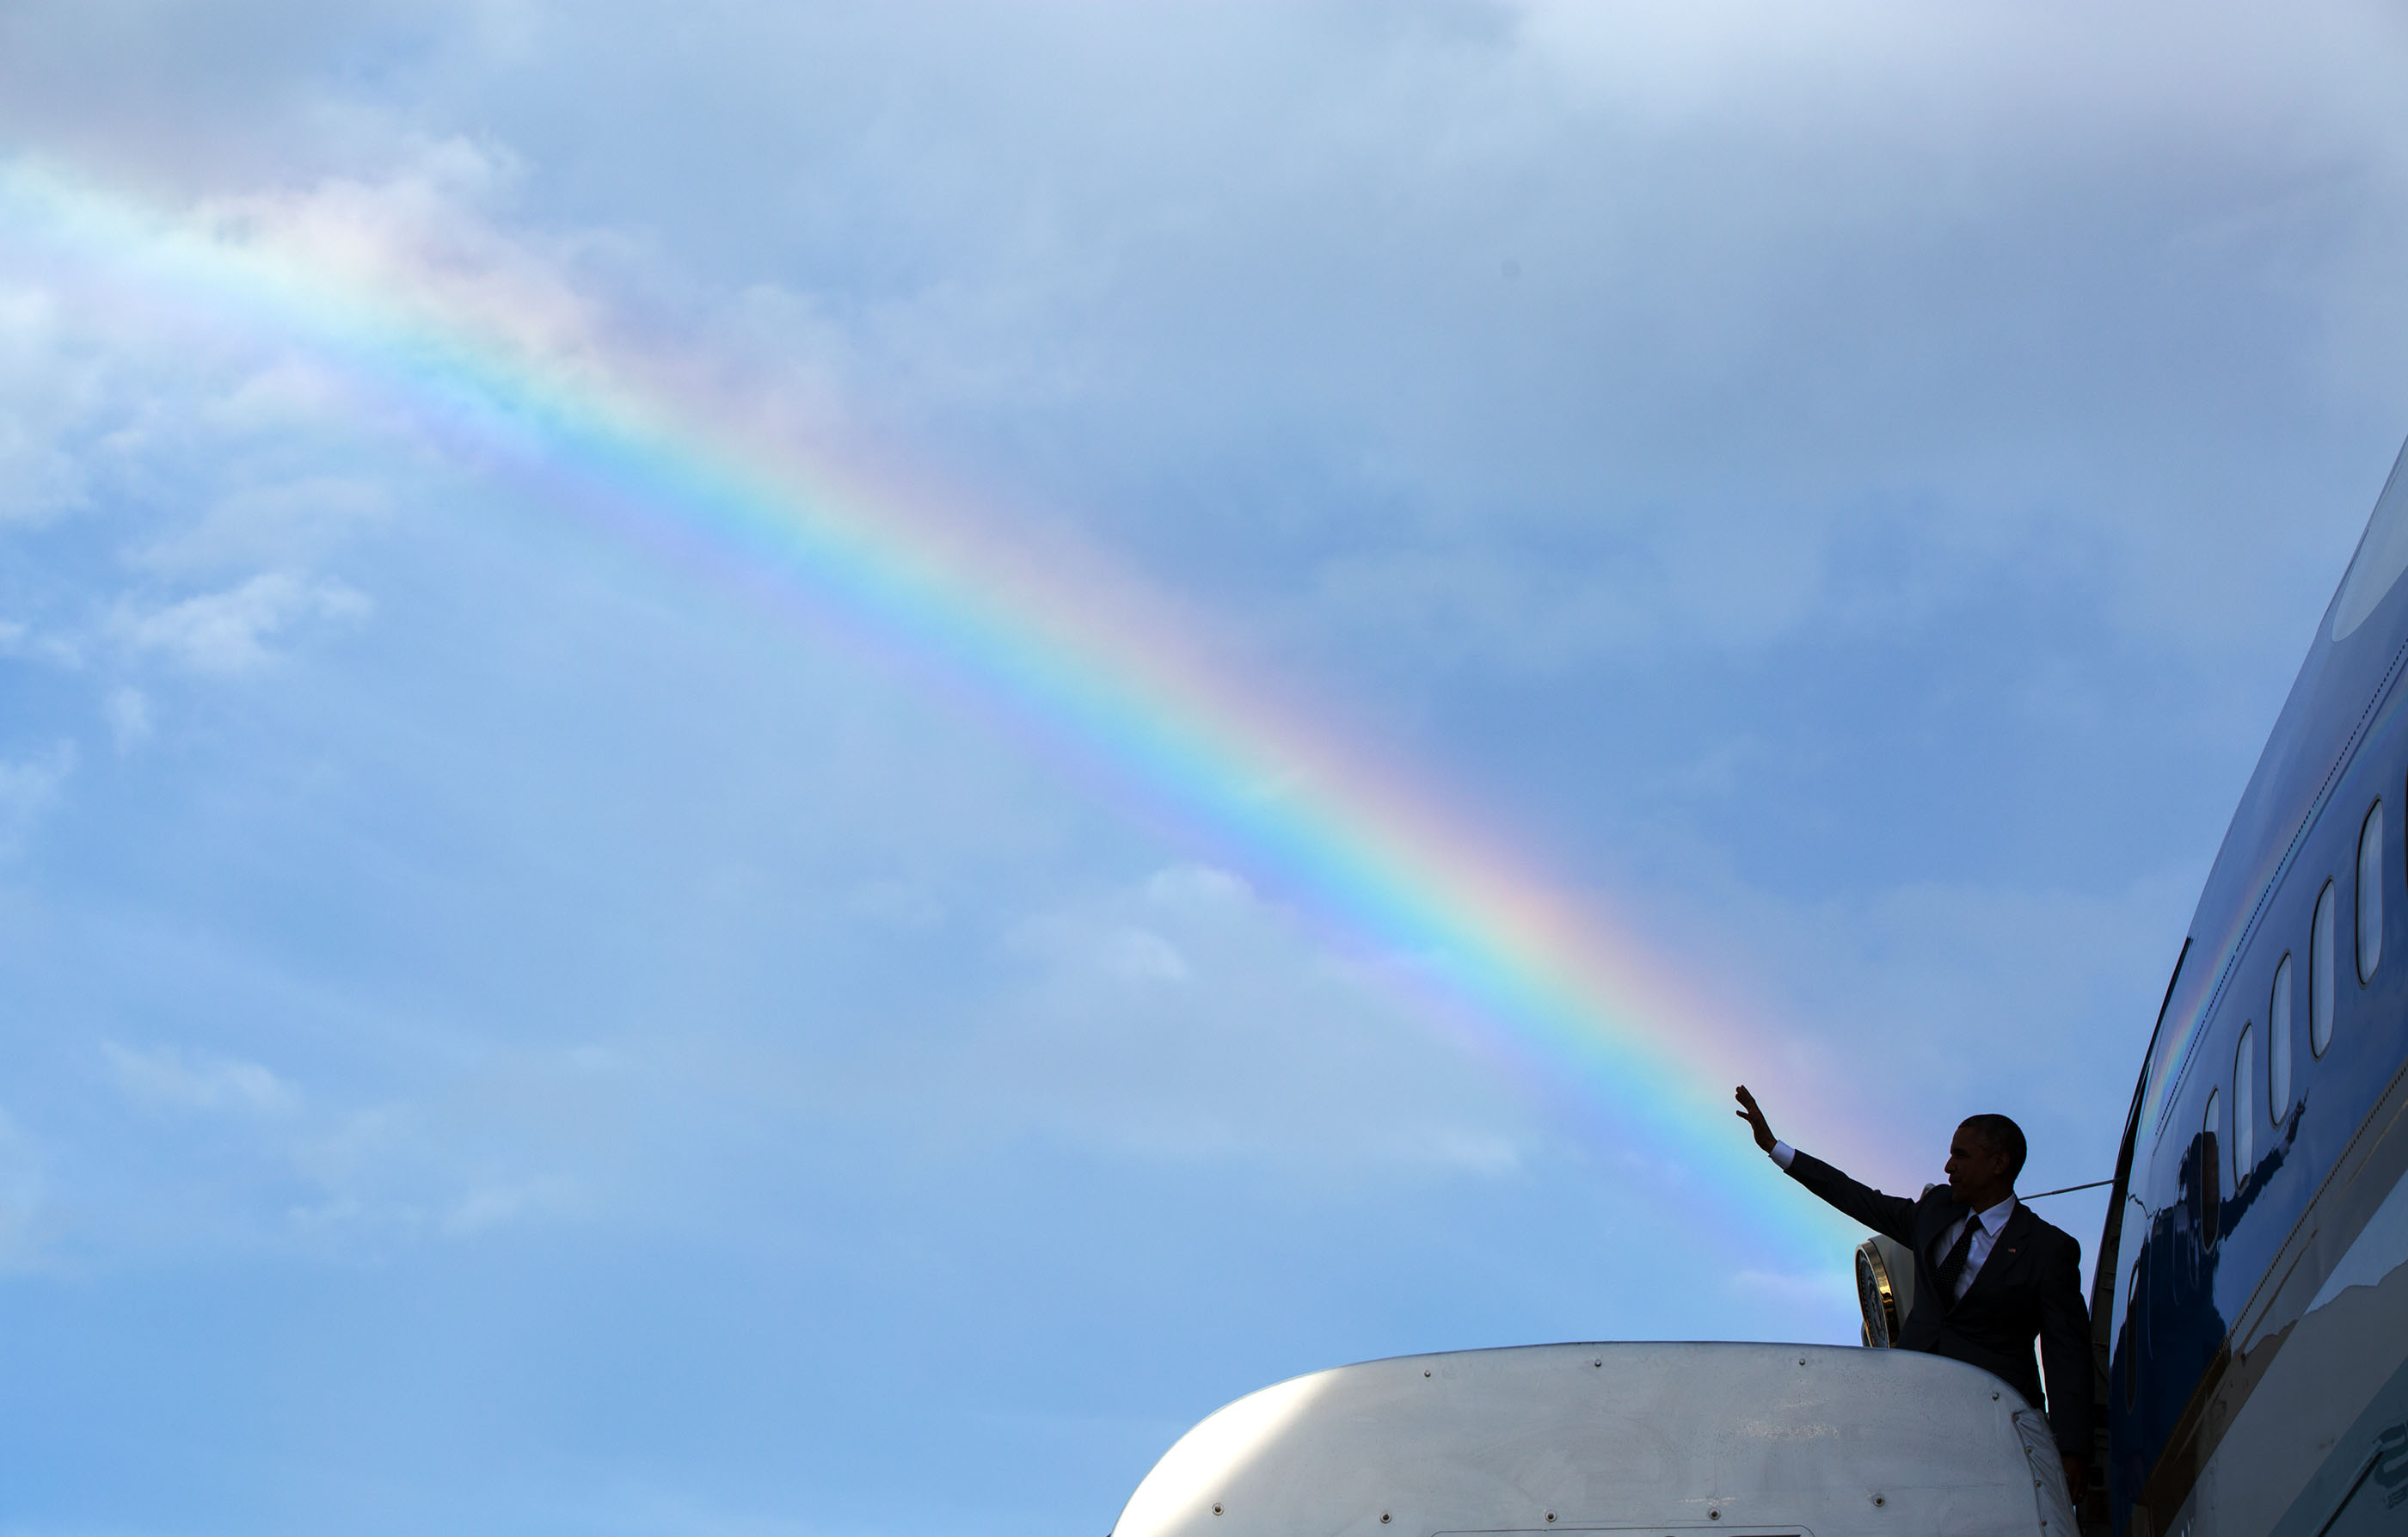 President Barack Obama boards Air Force One at Norman Manley International Airport prior to departure from Kingston, Jamaica en route to Panama City, Panama, April 9, 2015.  (Official White House Photo by Pete Souza)